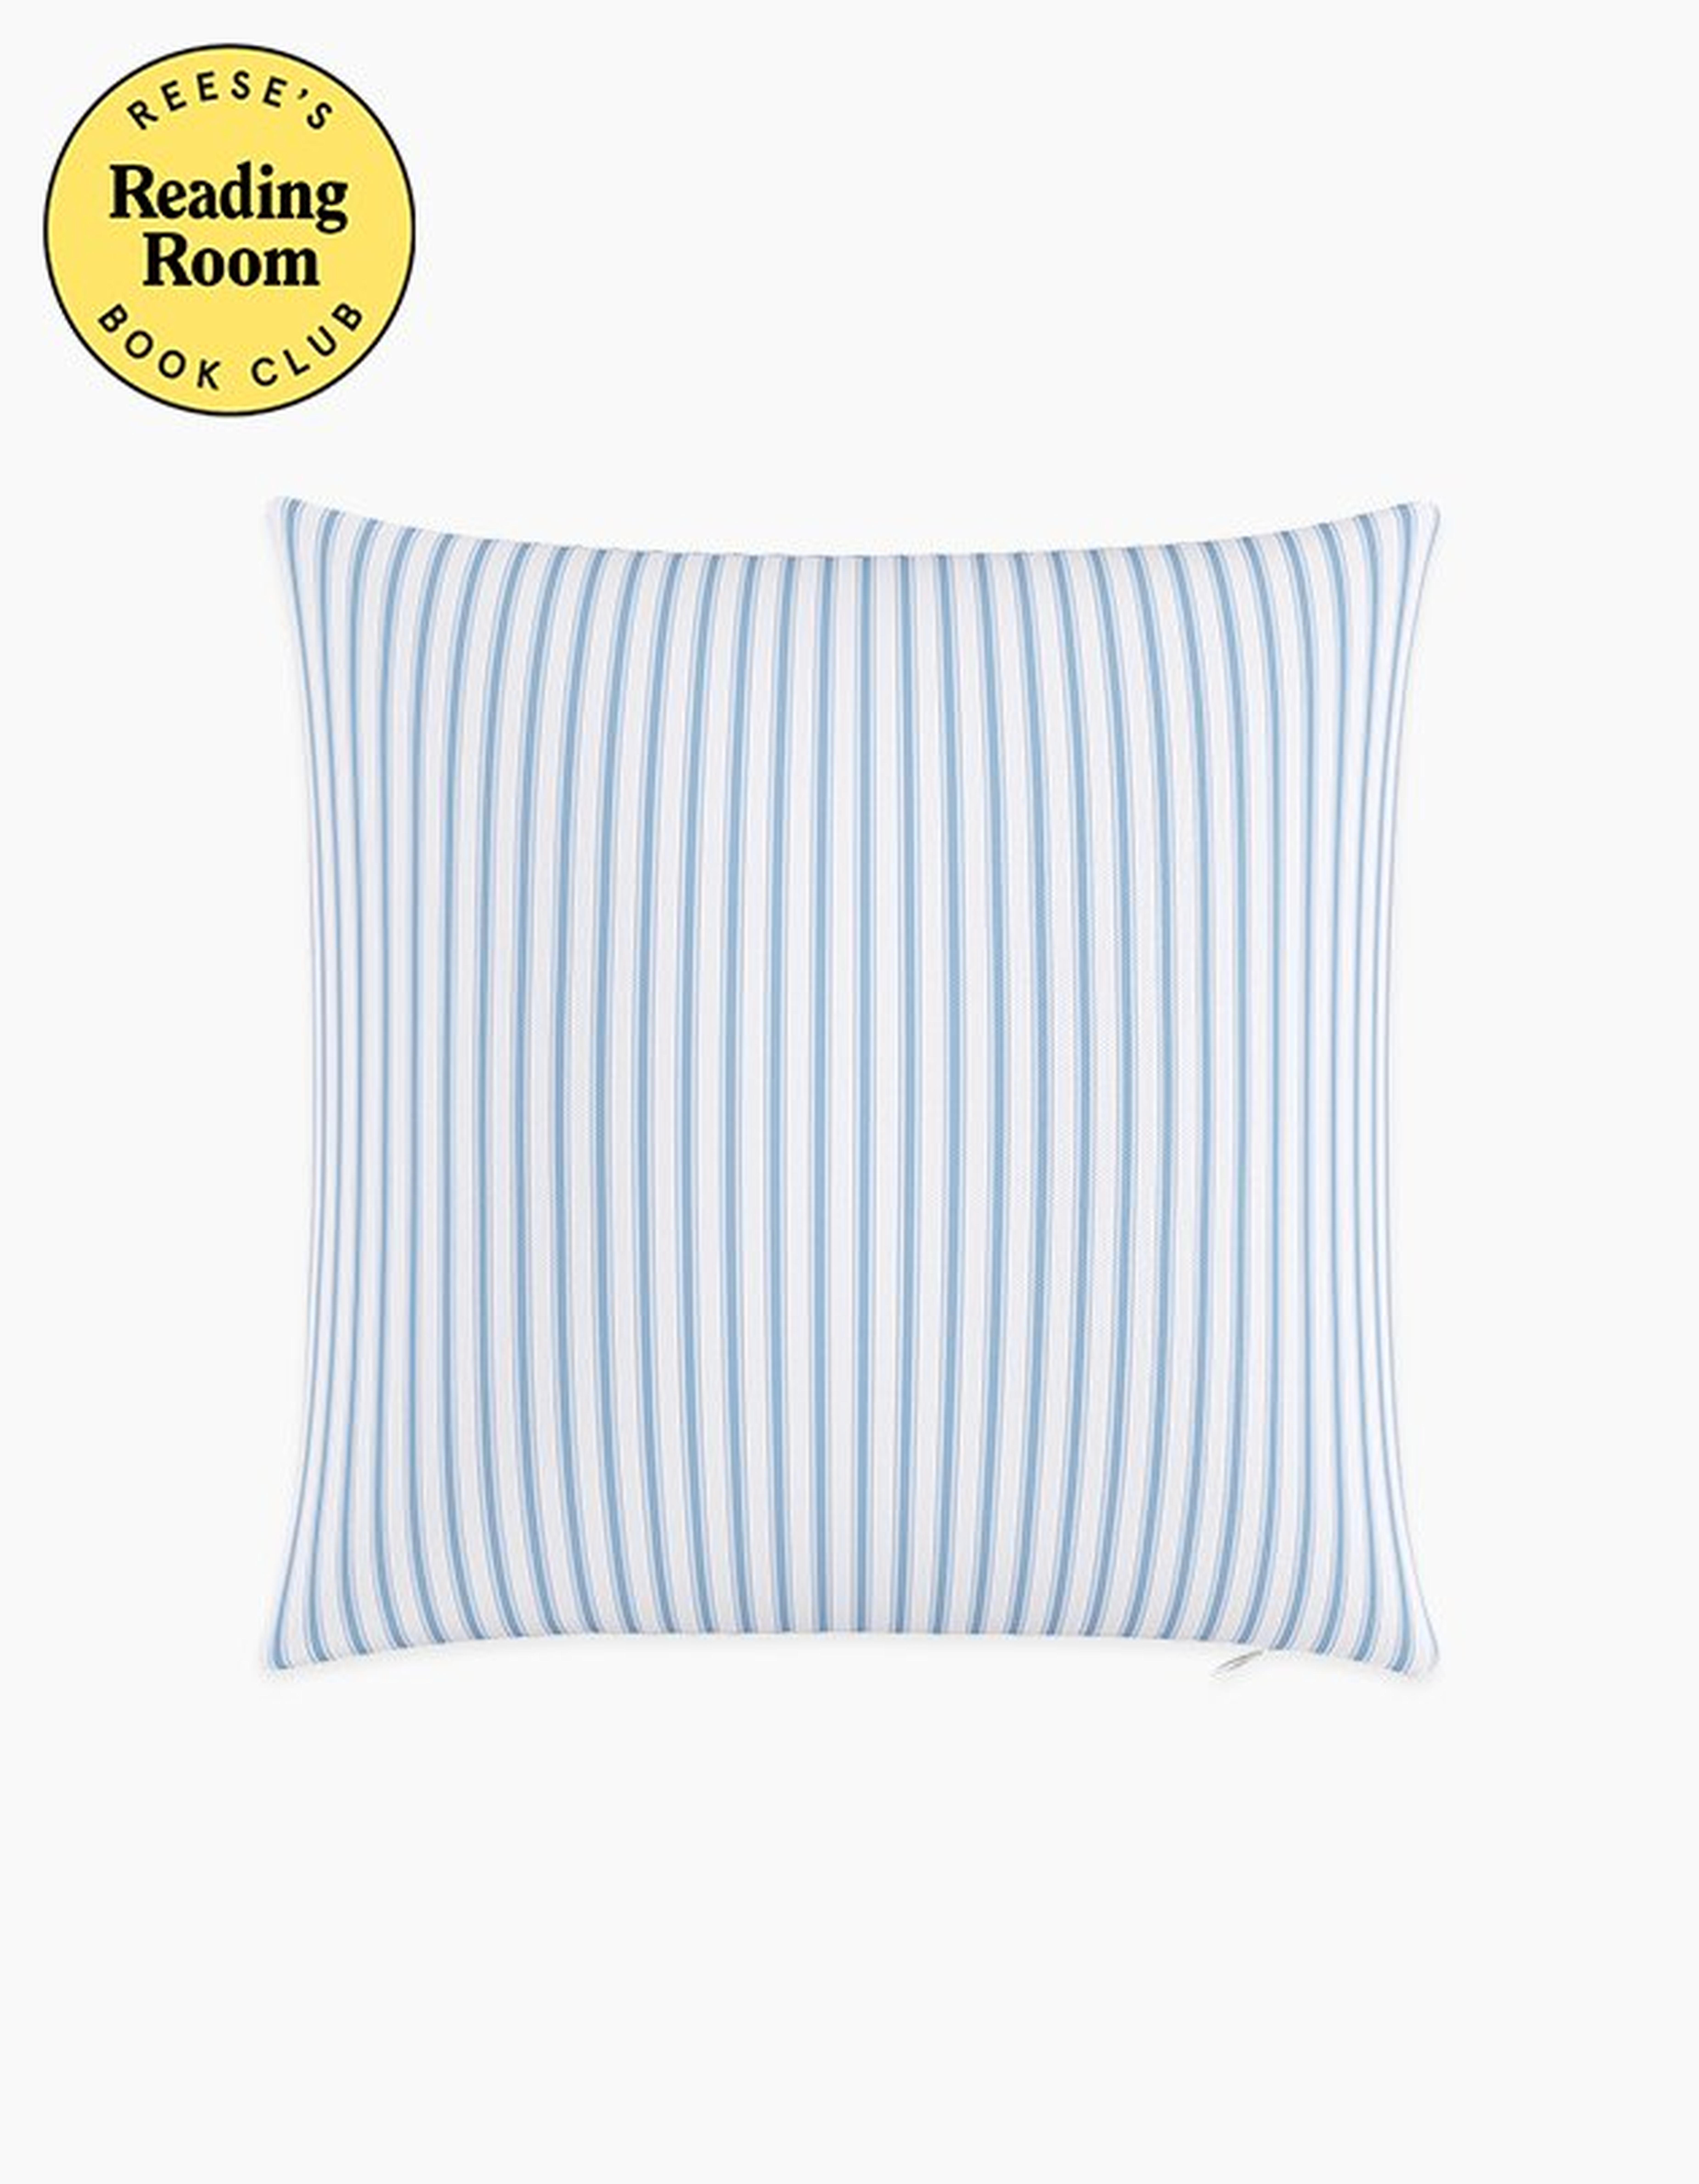 Ticking Stripe Throw Pillow - 20" x 20" - Reese's Book Club x Havenly